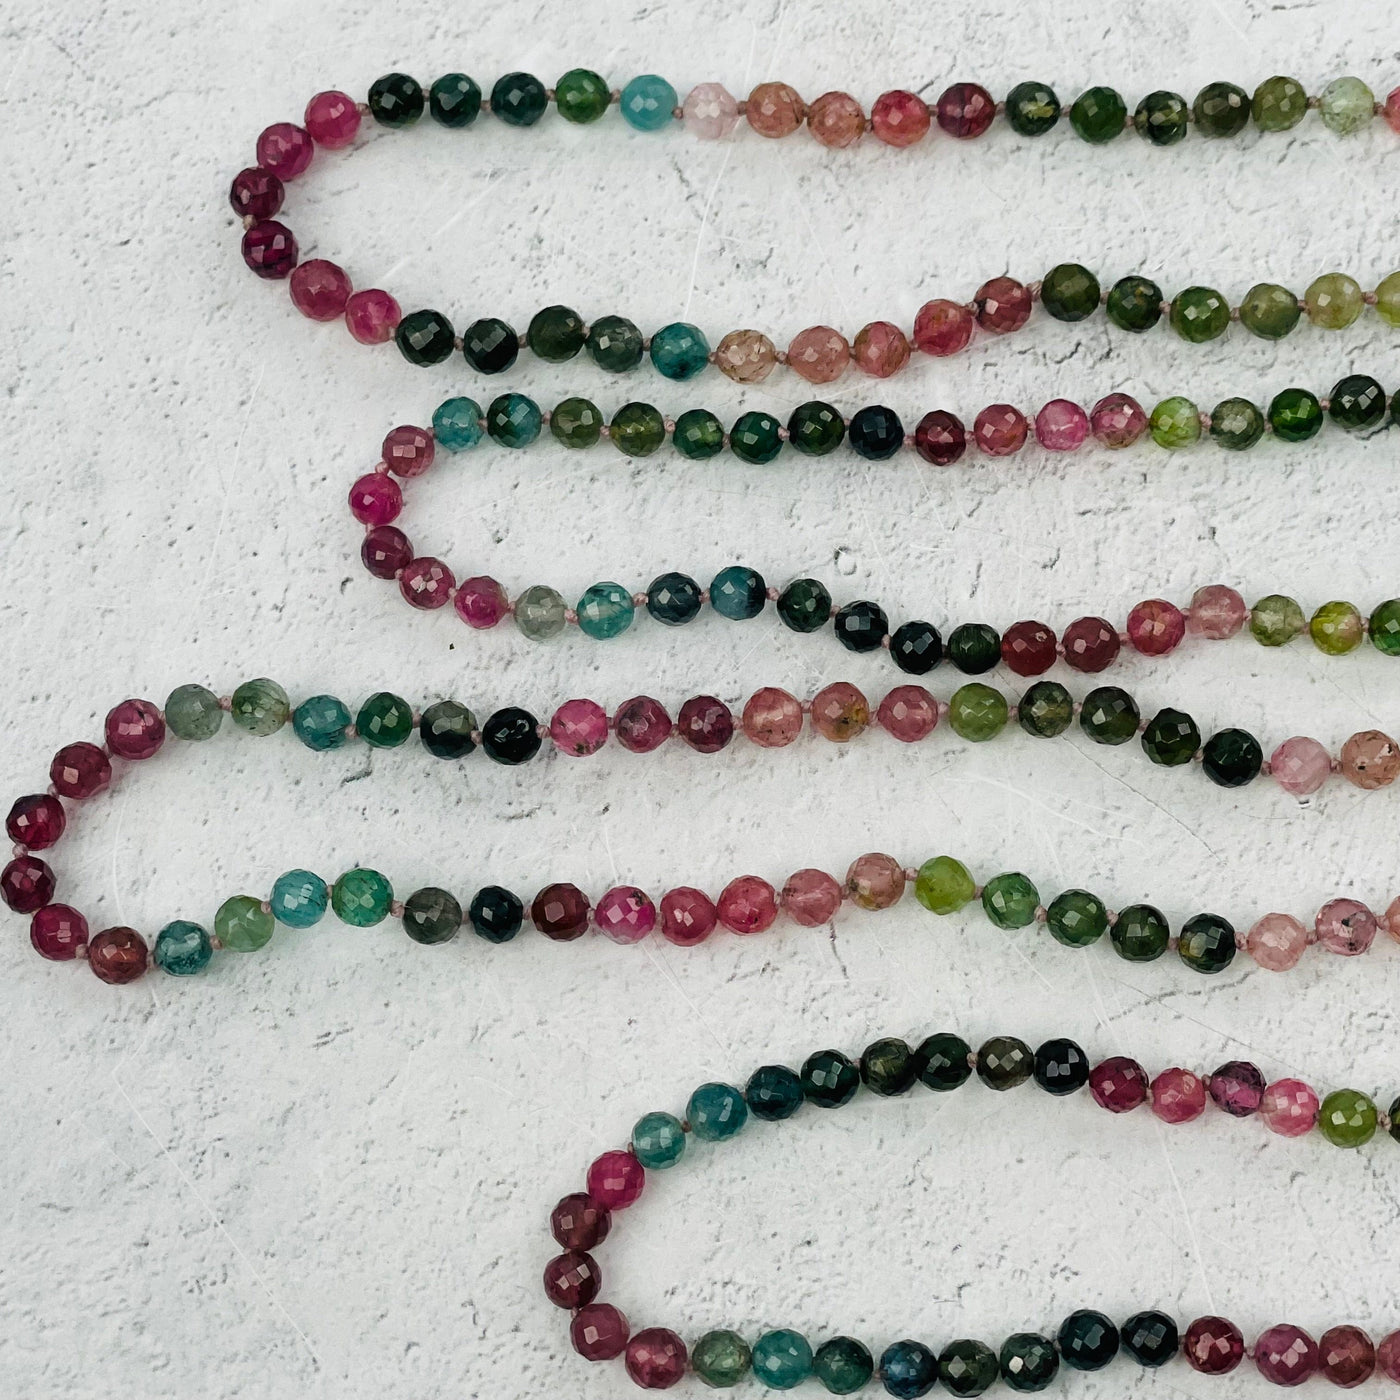 close up of the faceted beads